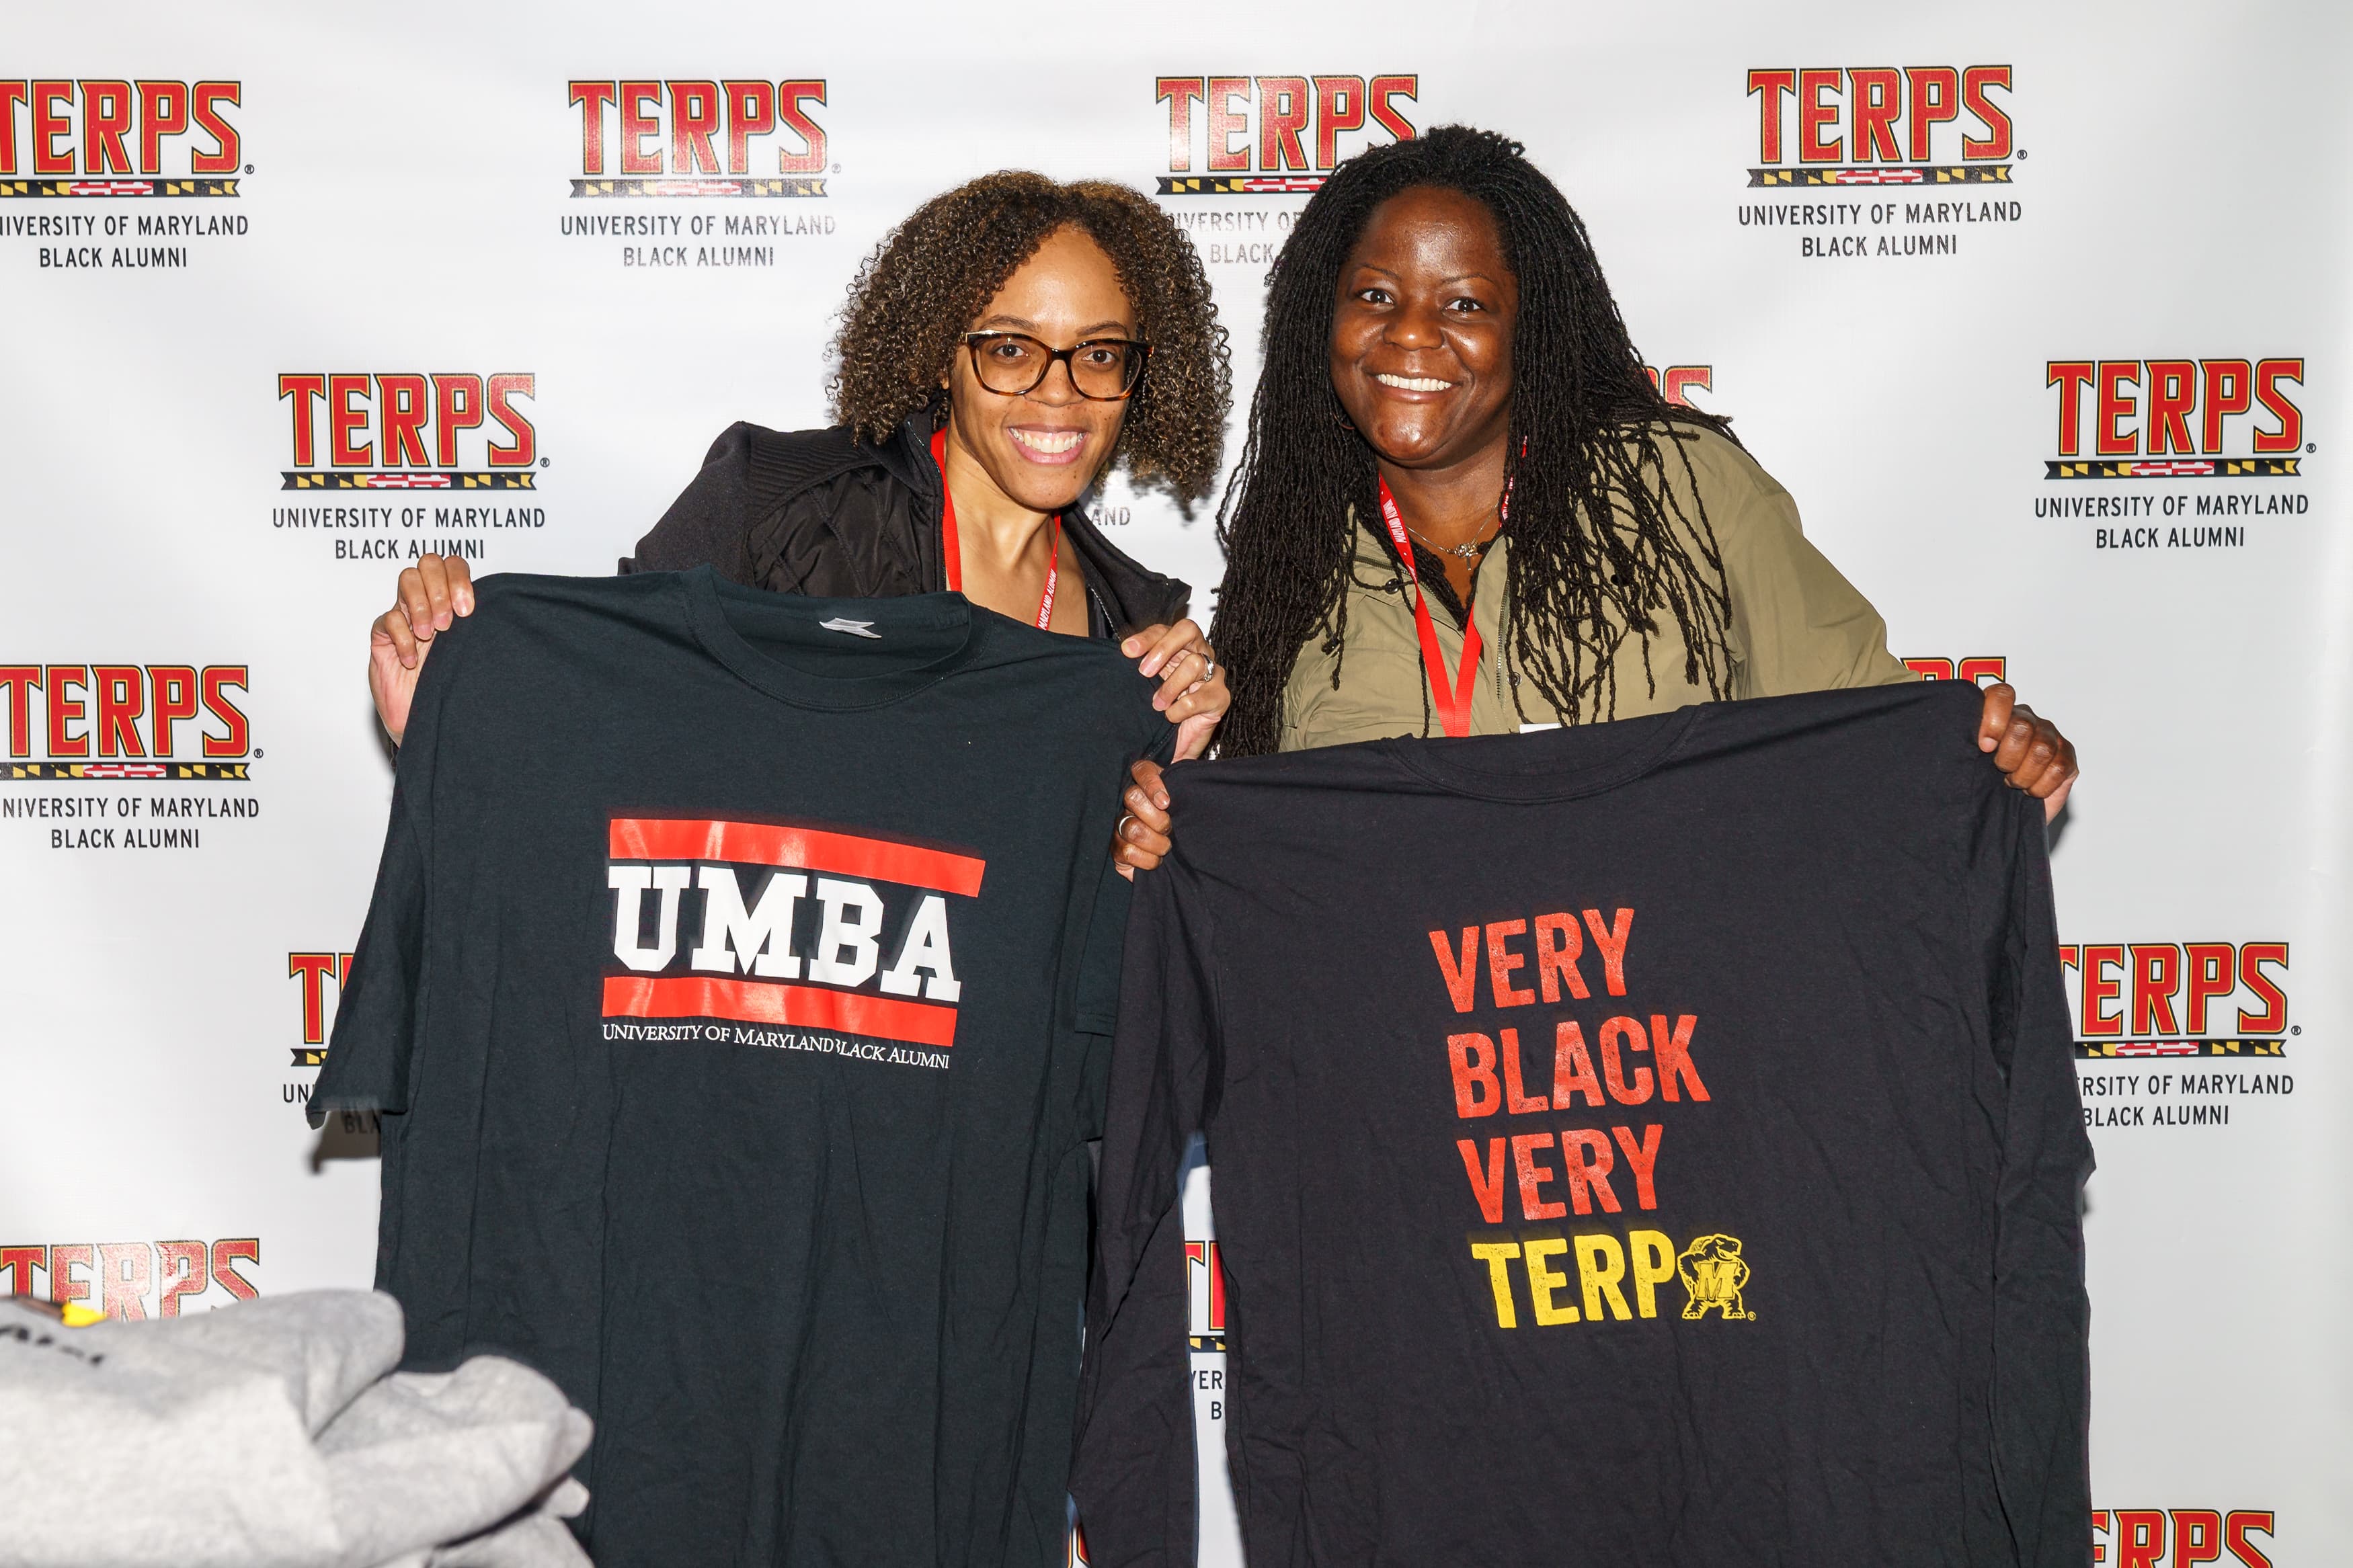 One person posing with an "UMBA" t-shirt, another posing with a "Very Black, Very Terp" shirt.